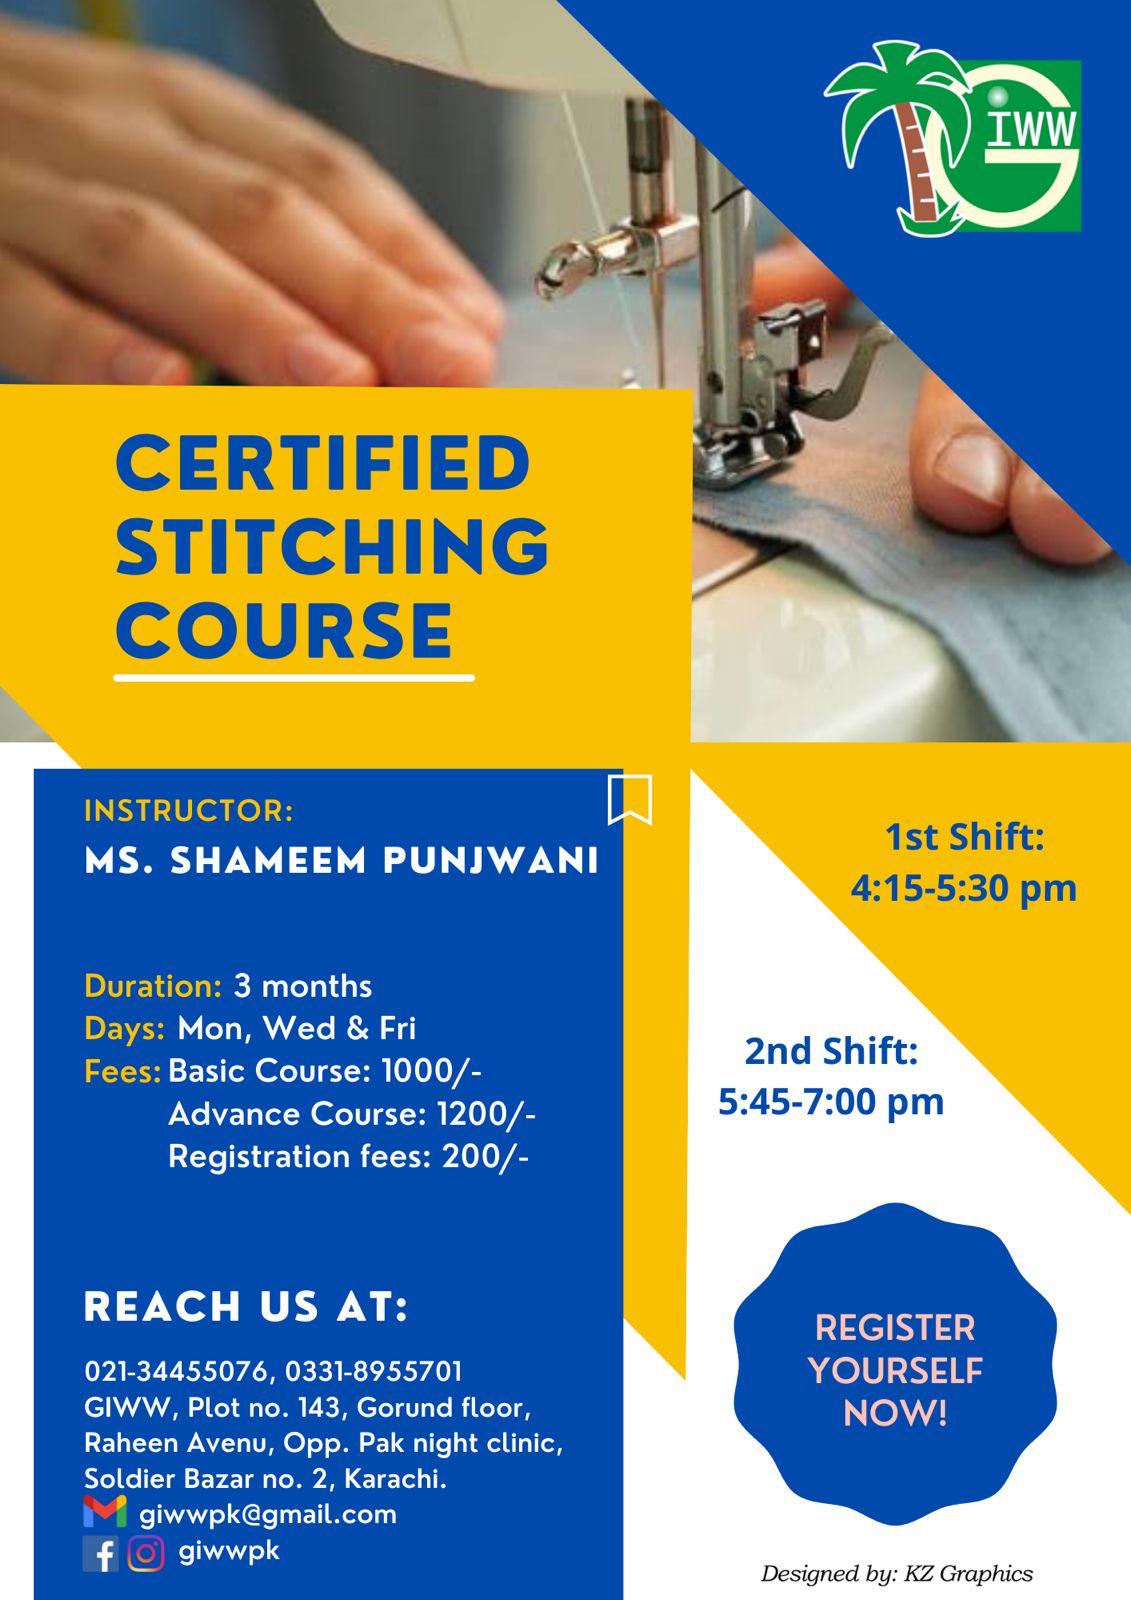 GIWW Certified Stitching Course (Evening)